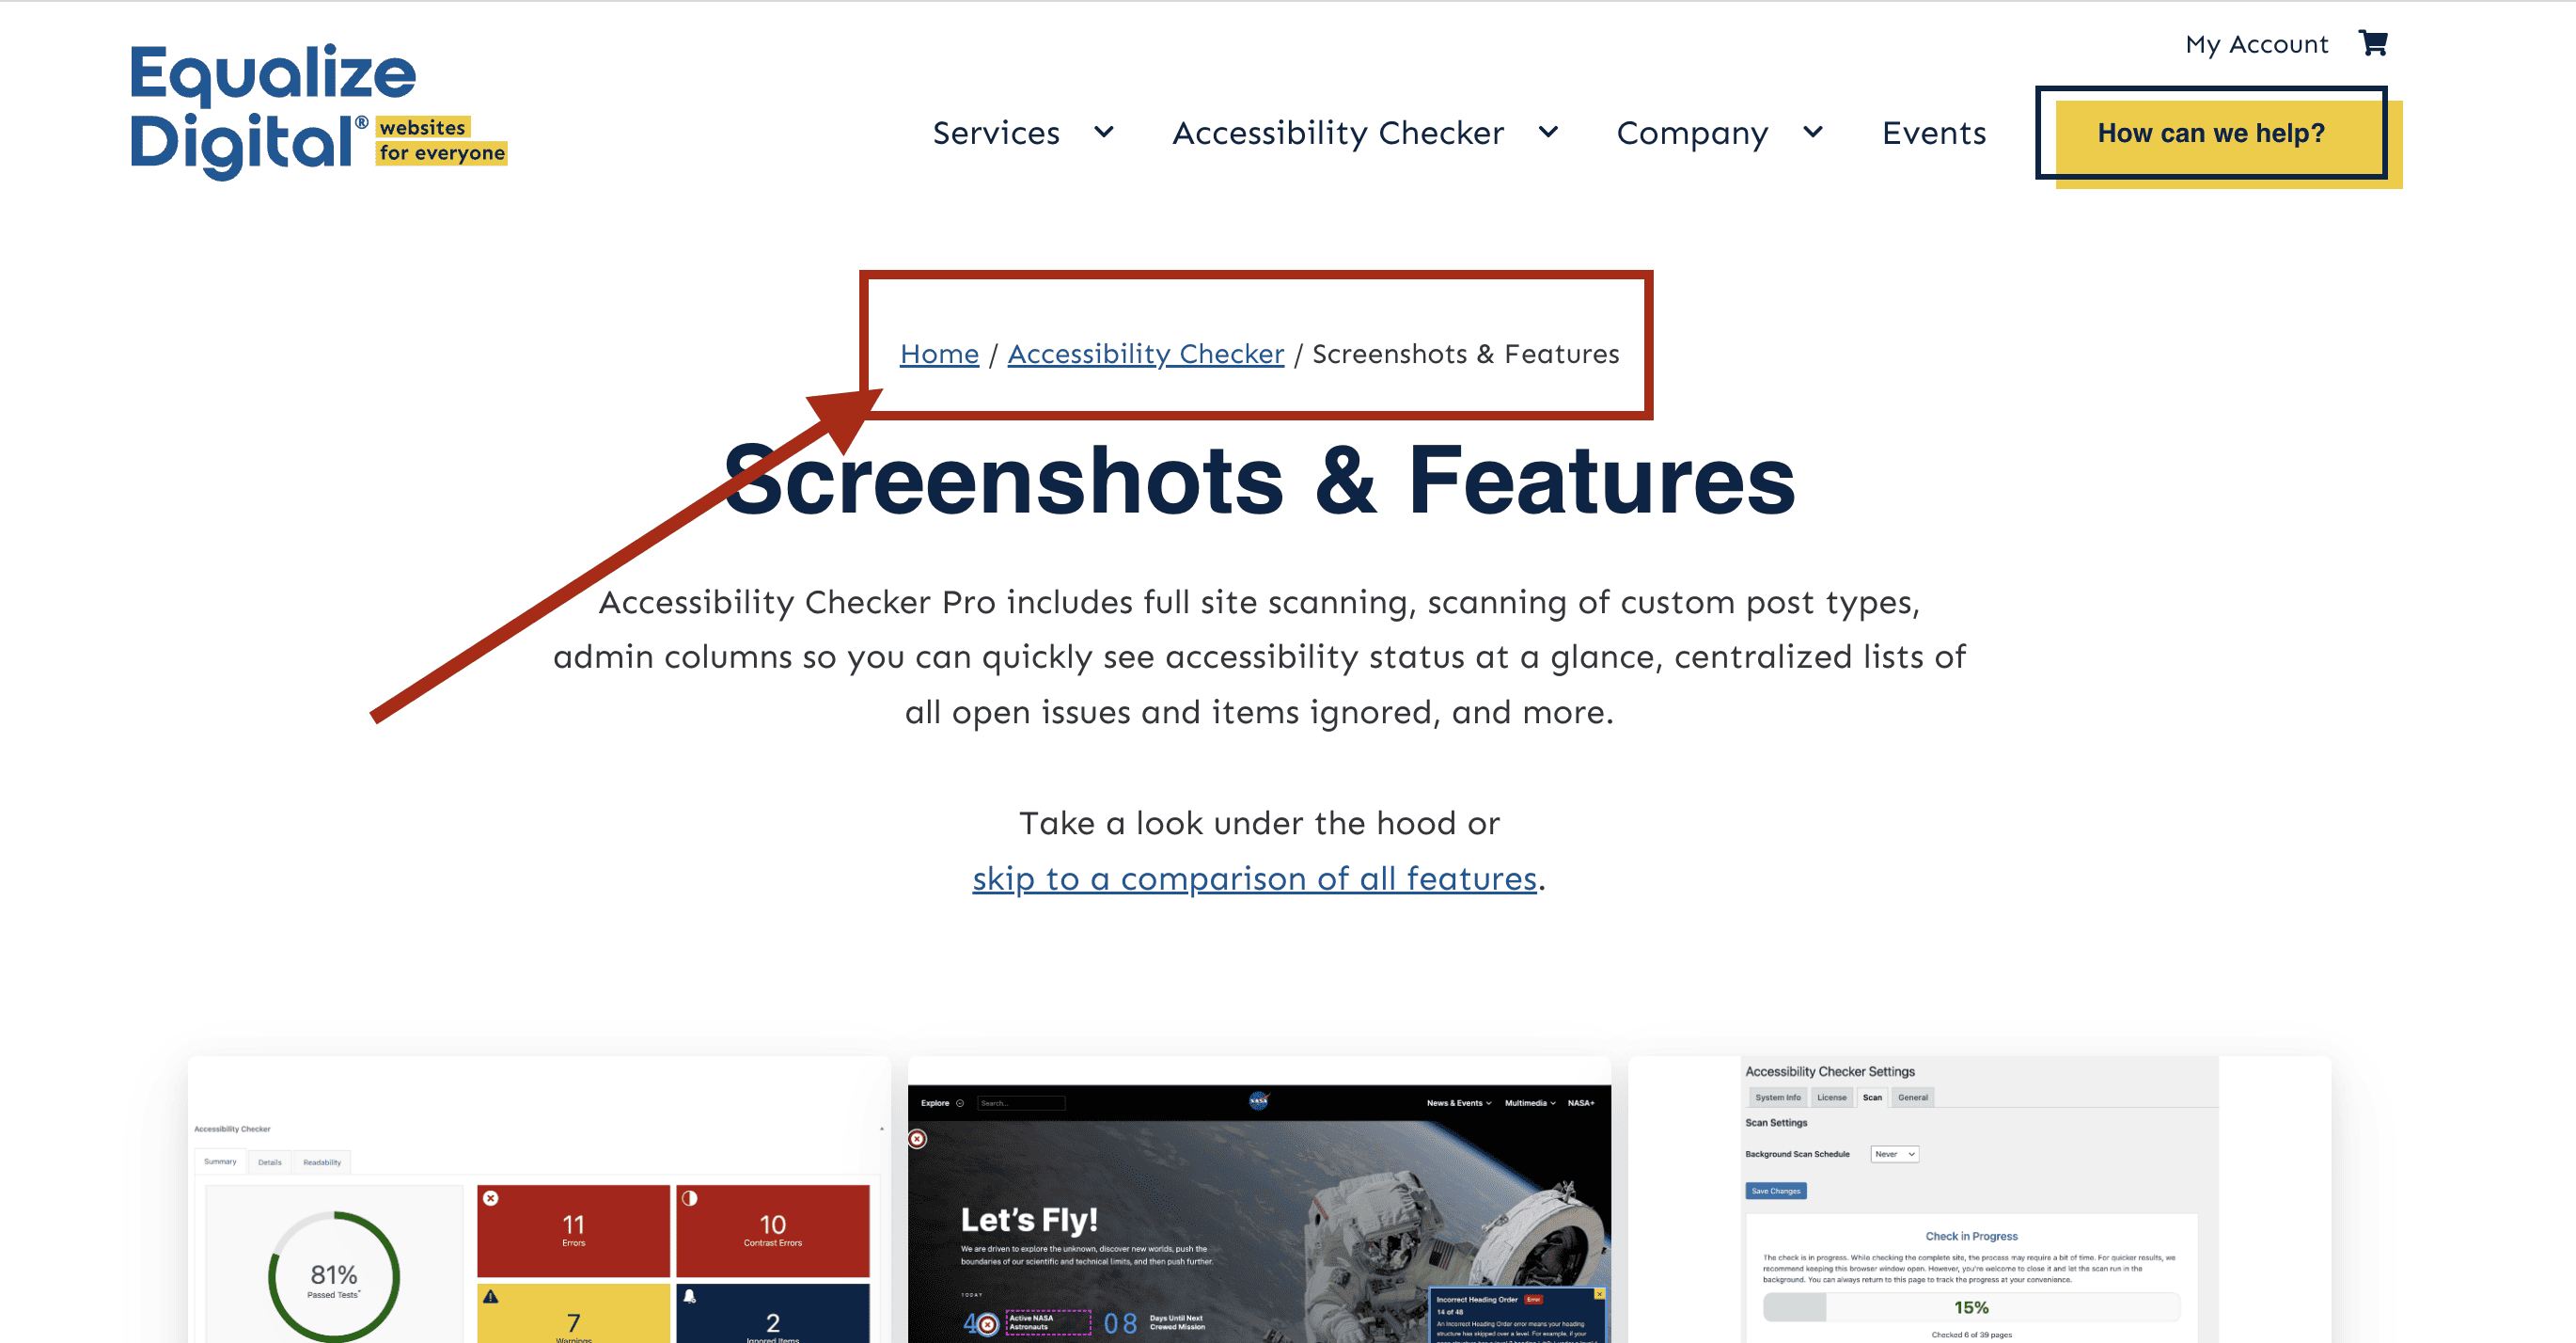 Breadcrumbs on the Equalize Digital website showing Home, Accessibility Checker, and the current page “Screenshots & Feature